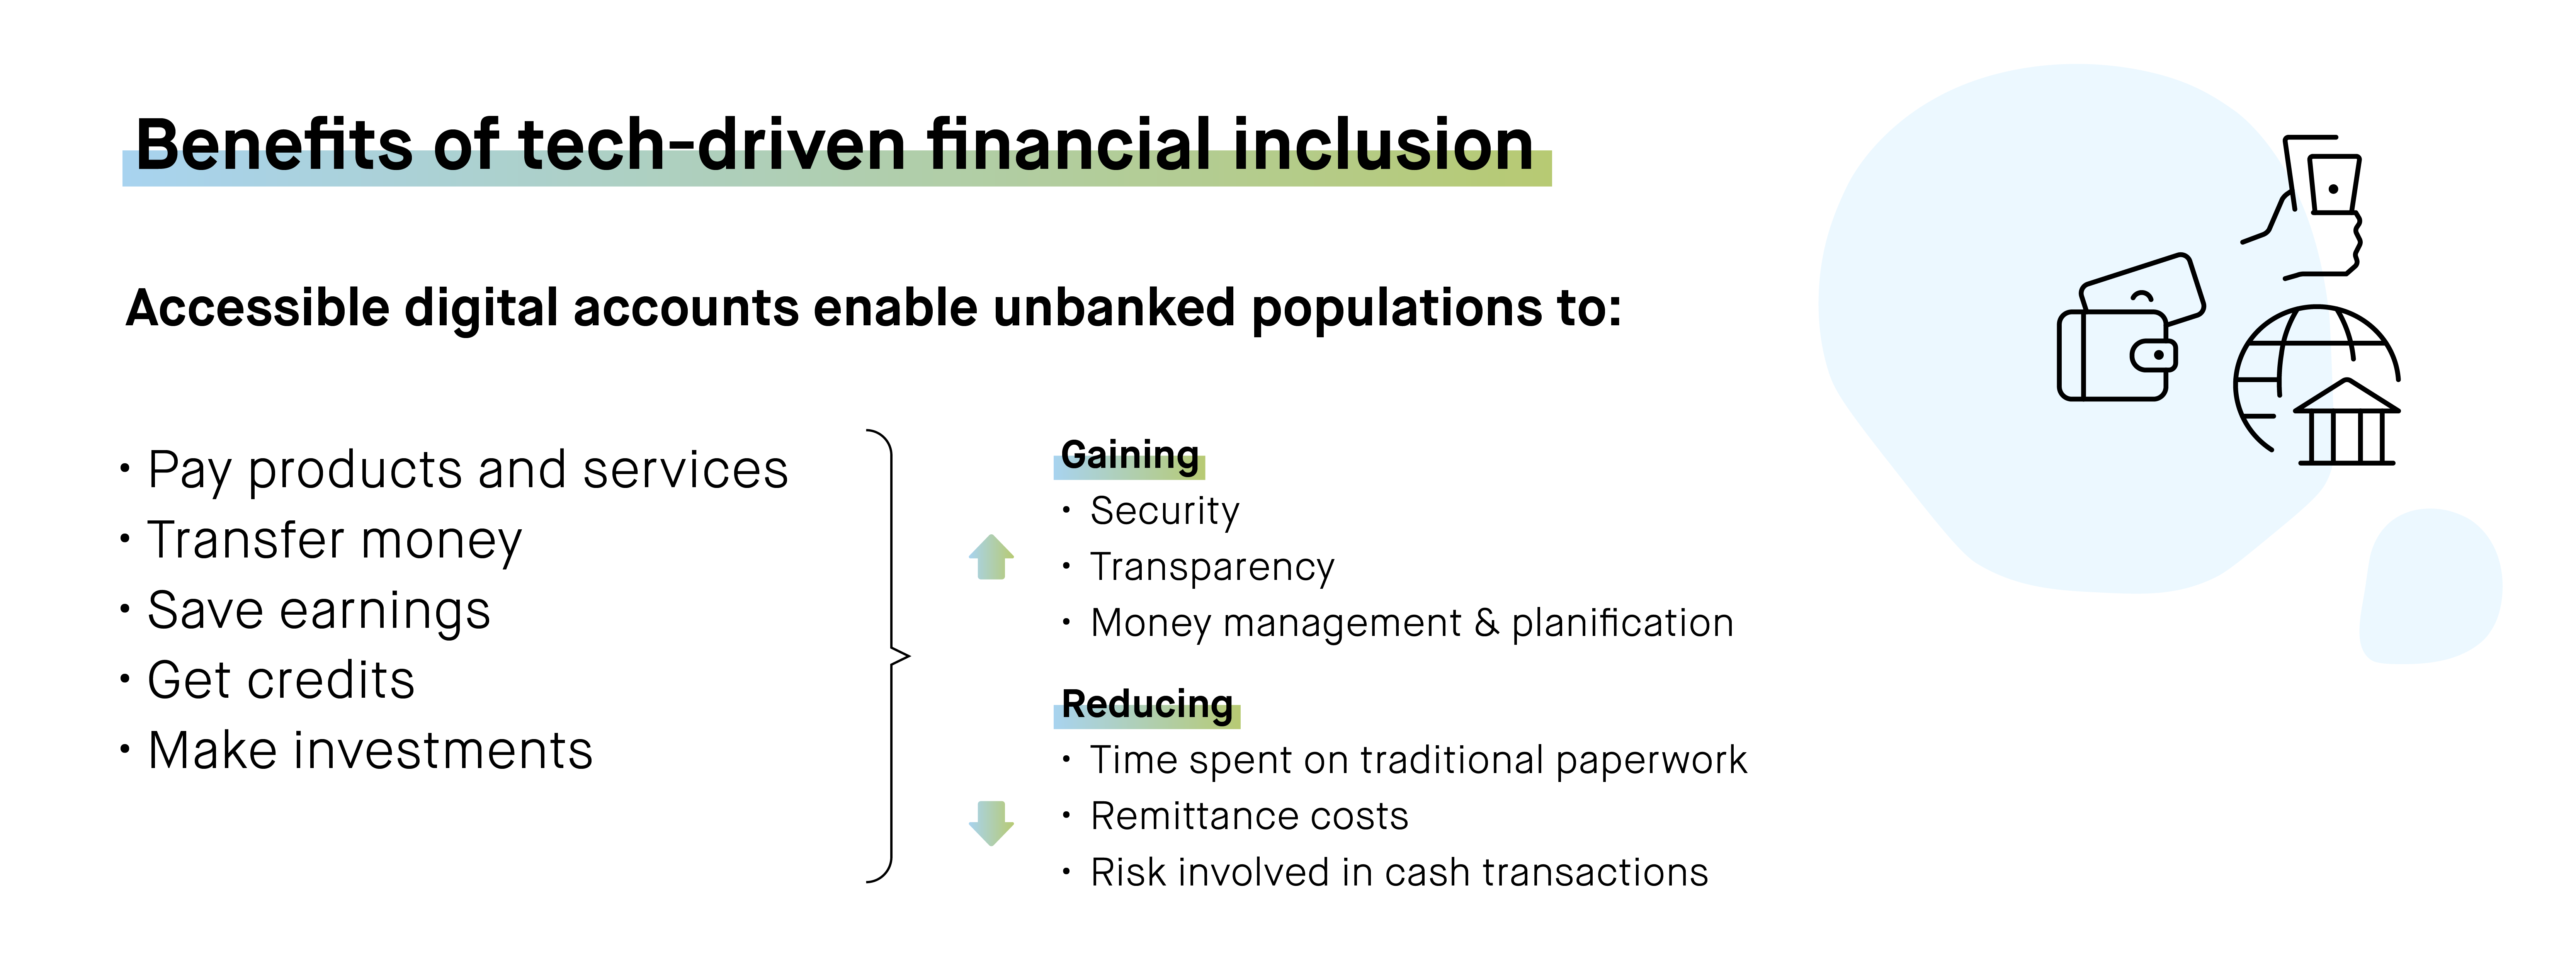 Benefits of tech-driven financial inclusion